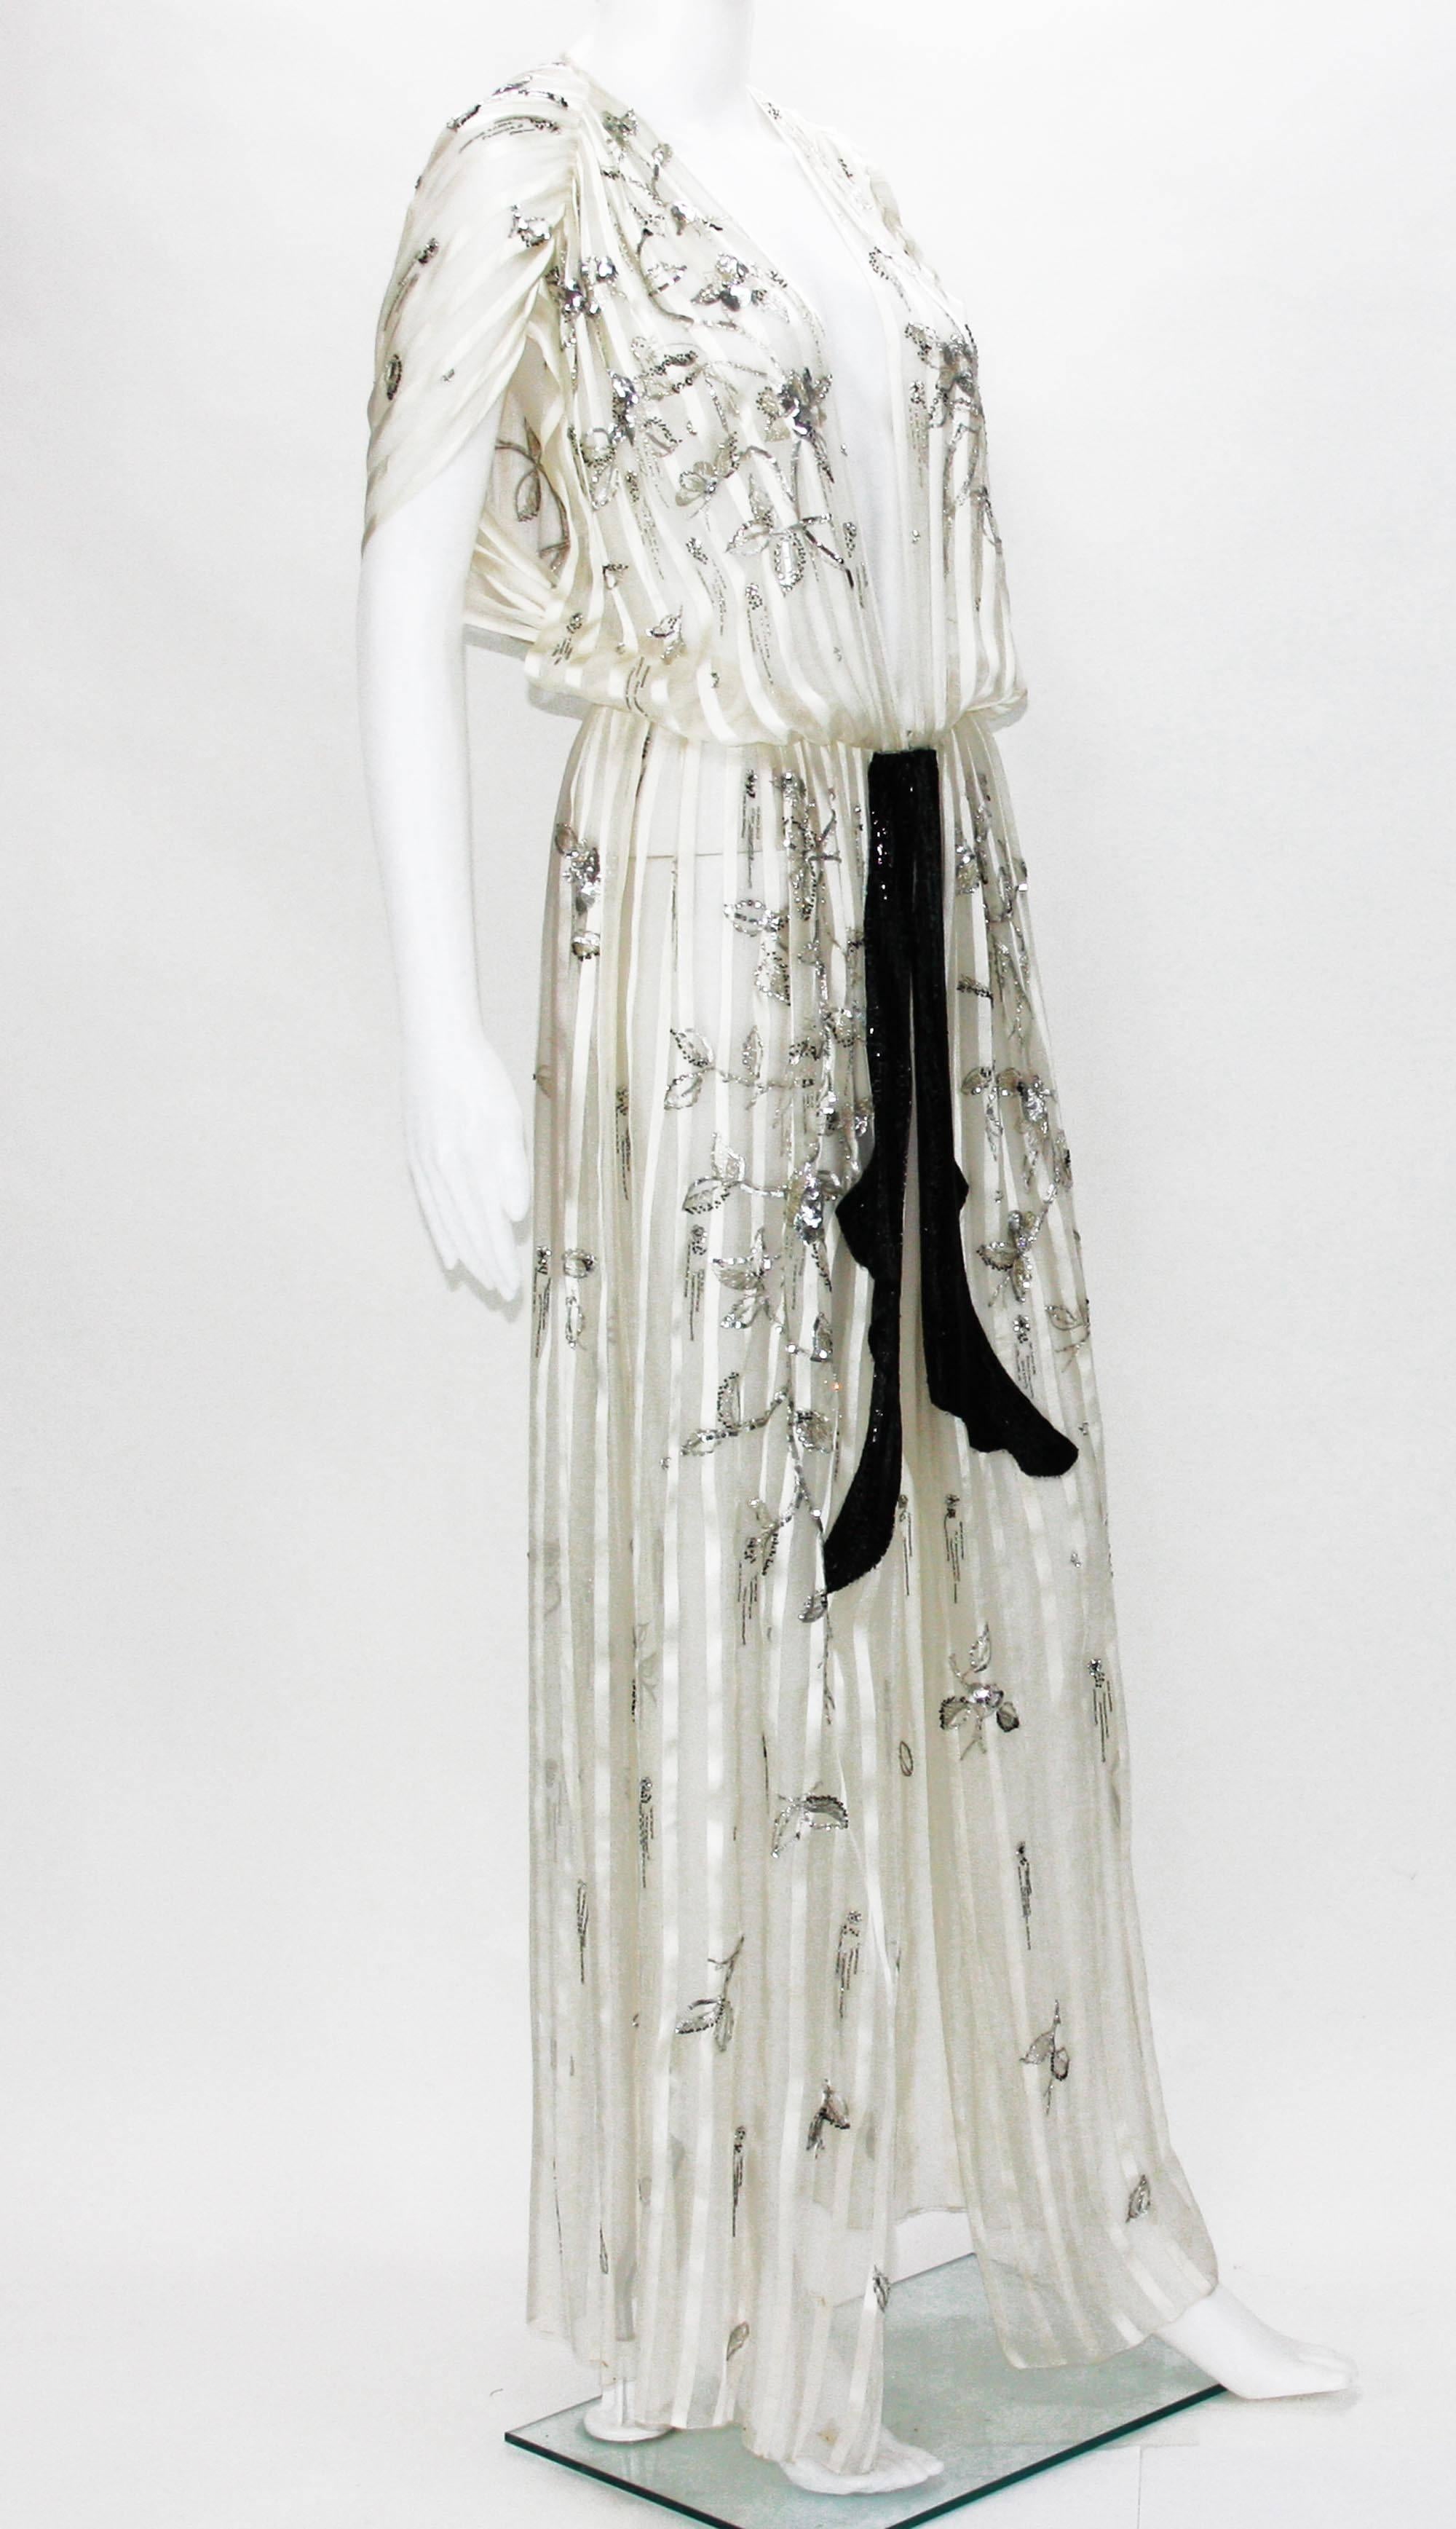 Christian Dior Paris 
Embellished Dress Duster
Printemps-Ete 1979
Numbered - 011612
Color - Ecru.
Finest Silk Sheer.
Embroidered birds, butterflies and flowers with Silver tone Sequins and Black Little Beads.
Fully Beaded Belt-like.
Hook and eye